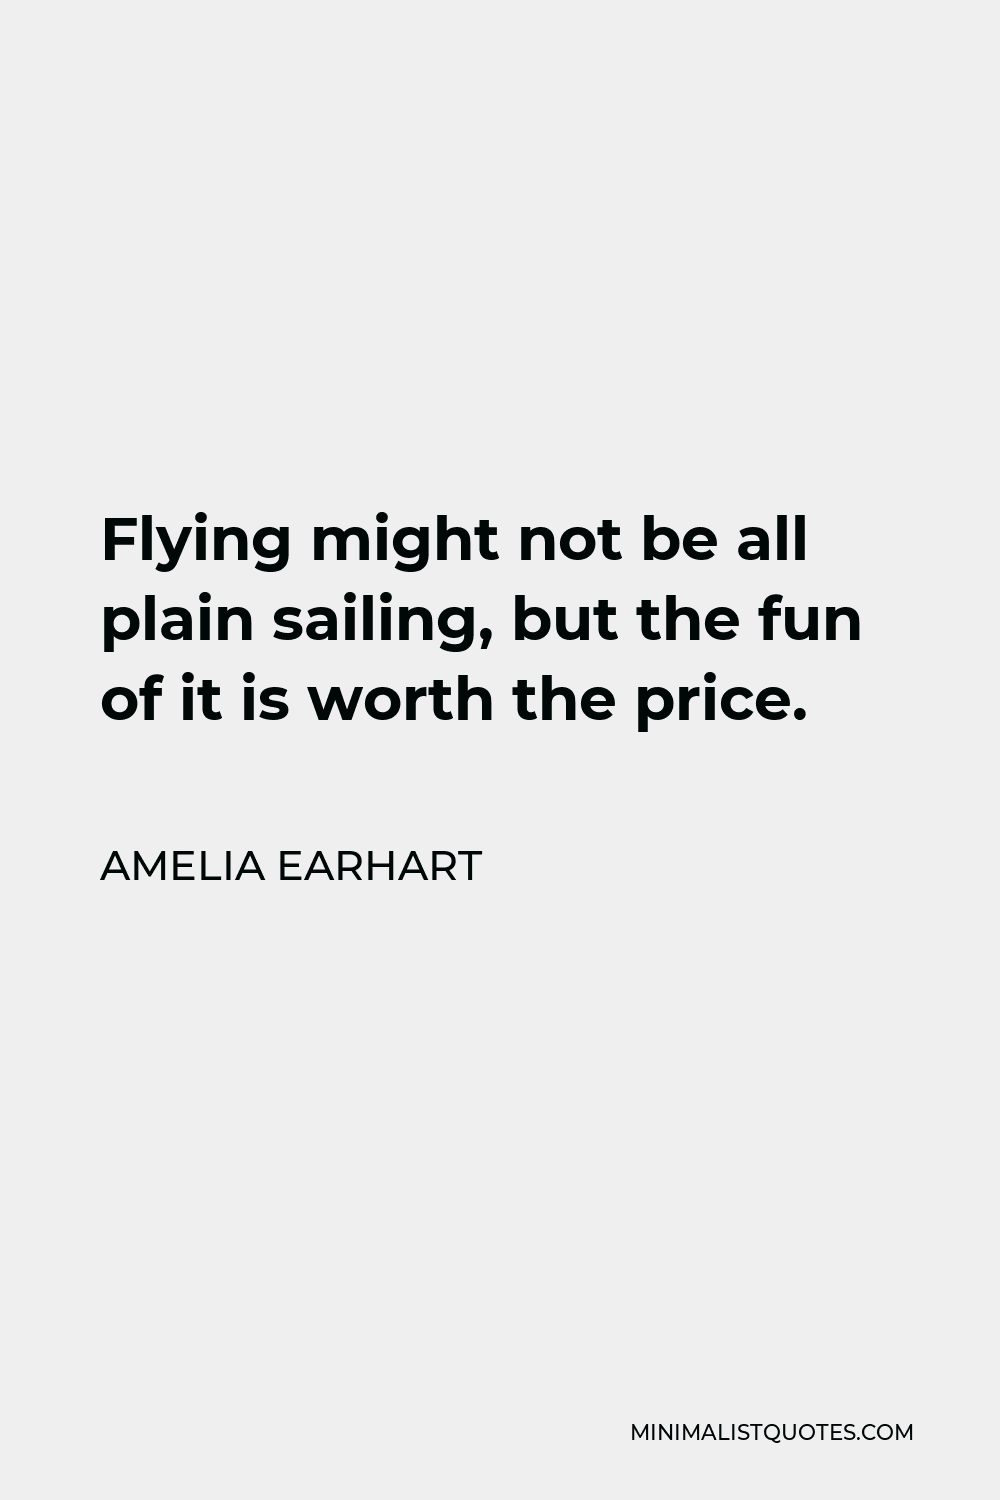 Amelia Earhart Quote: Flying might not be all plain sailing, but